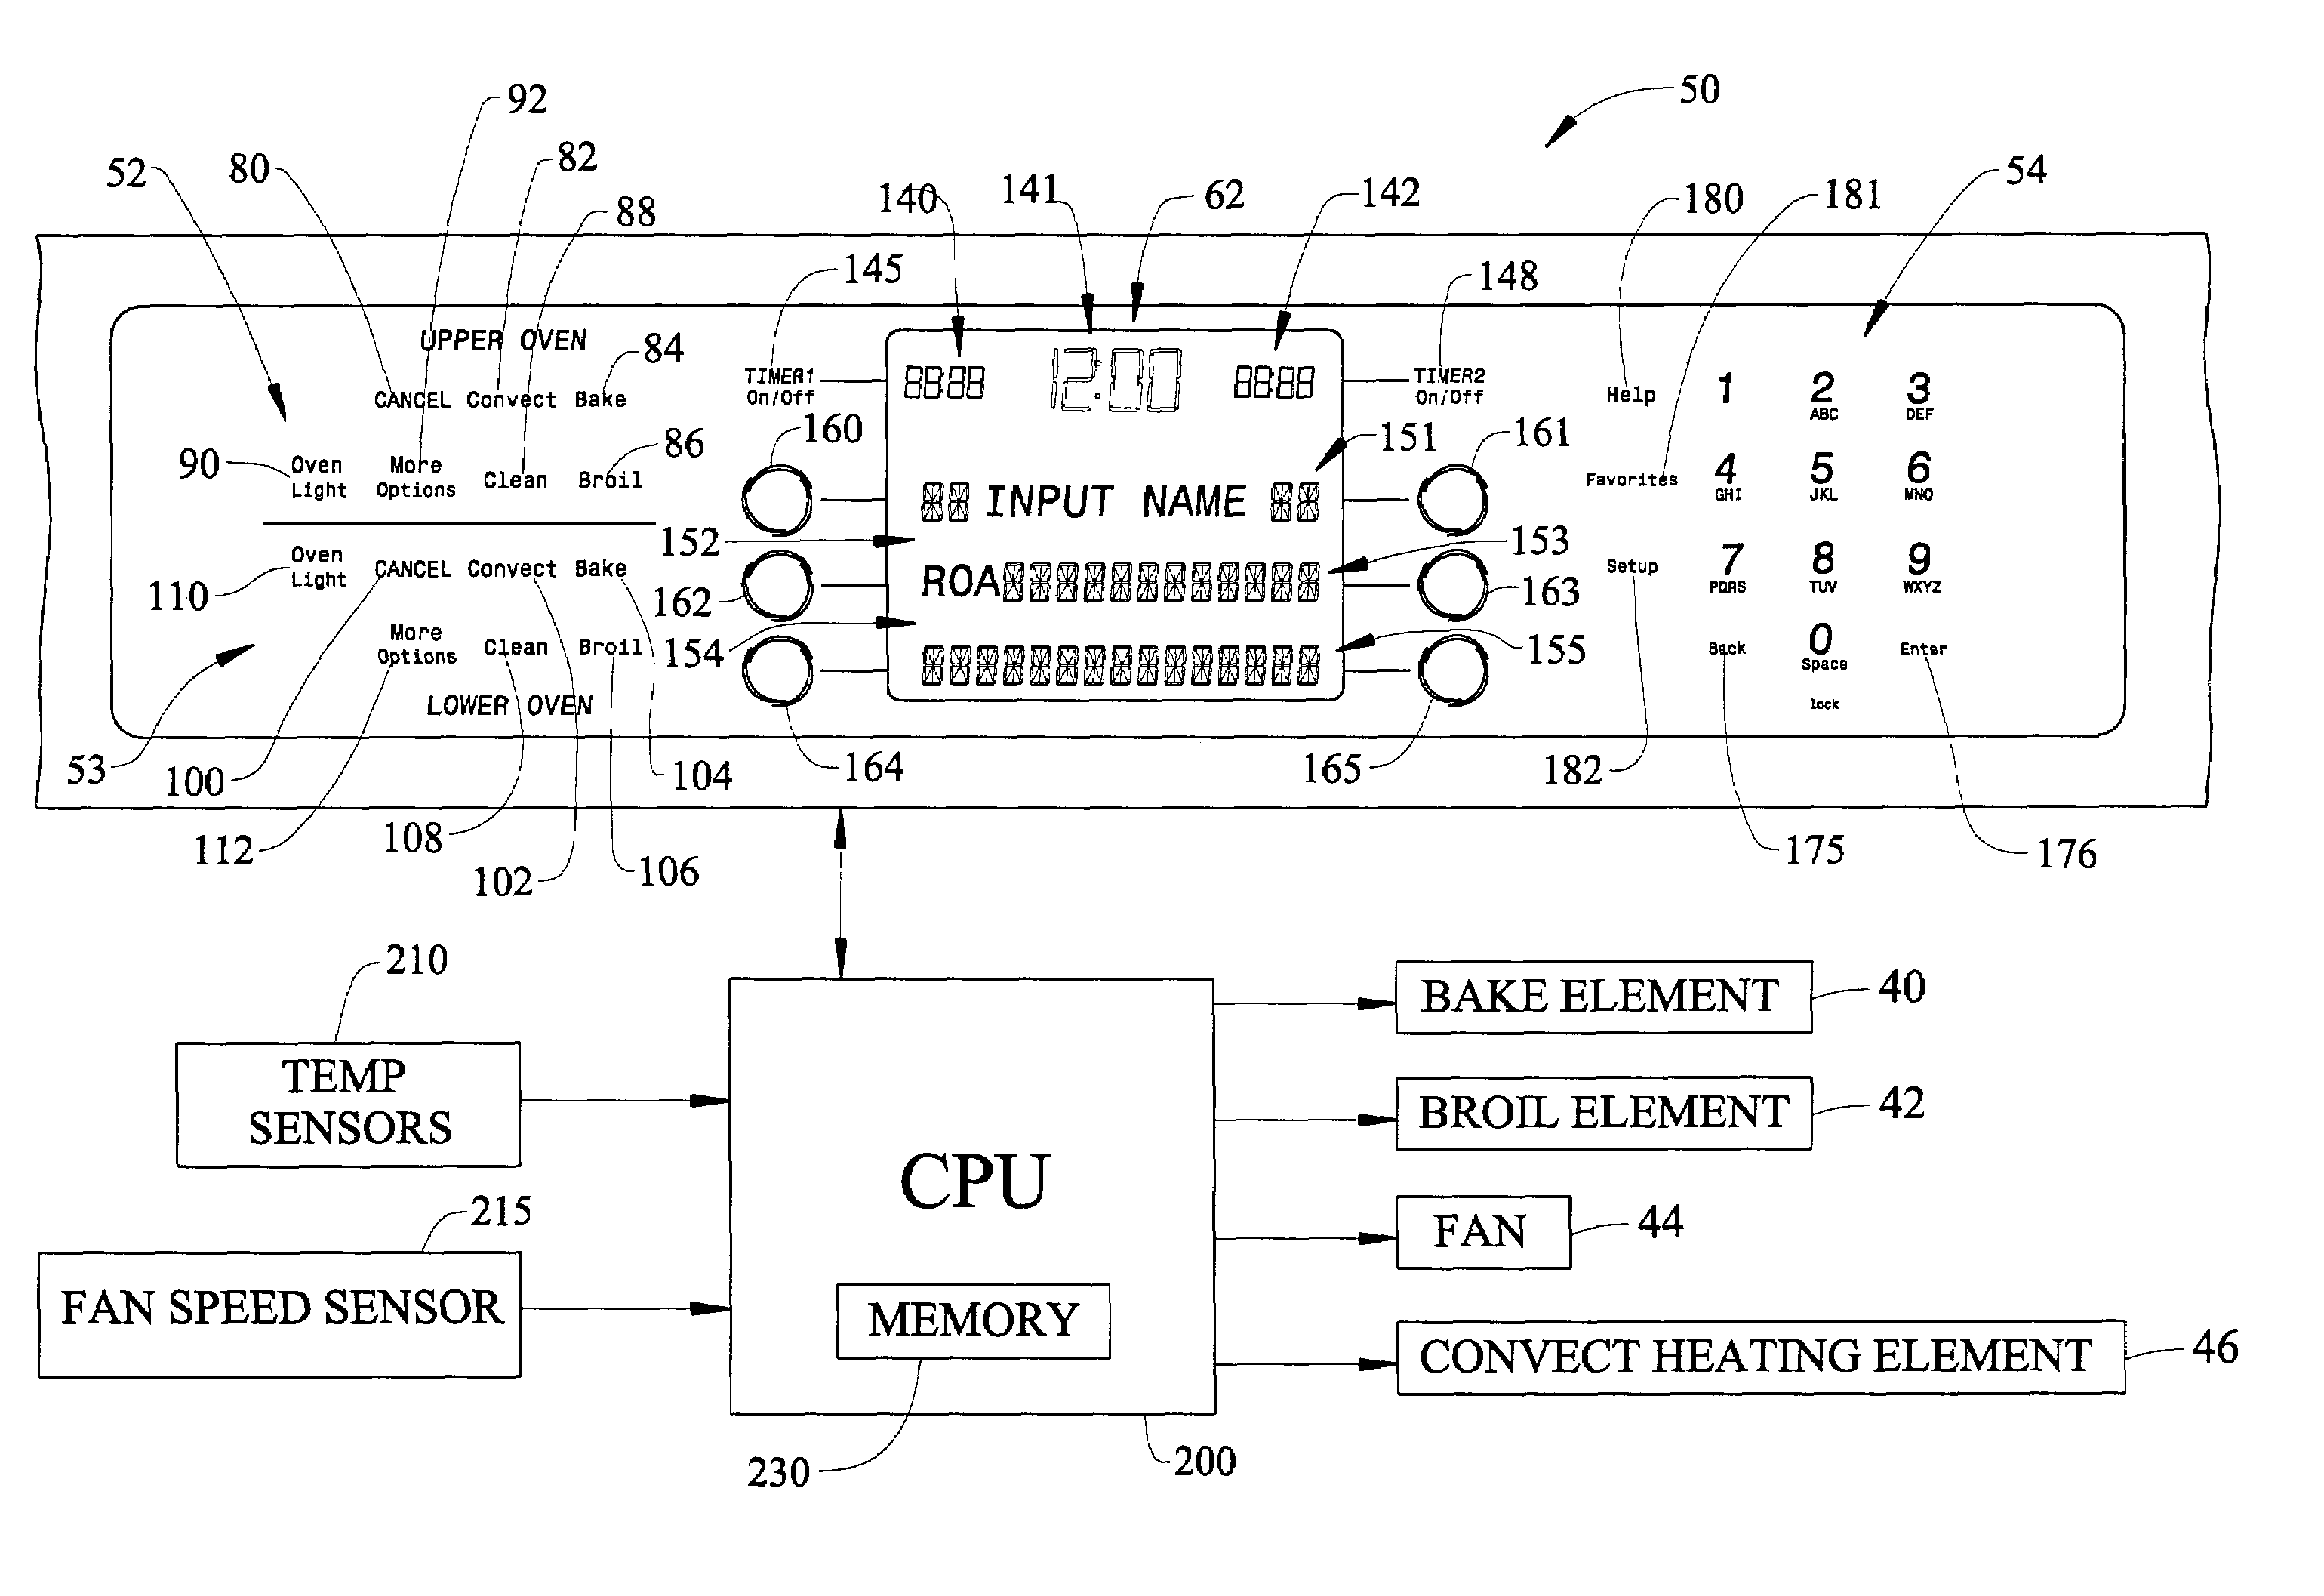 Alpha-numeric data entry and display for electronic oven control system